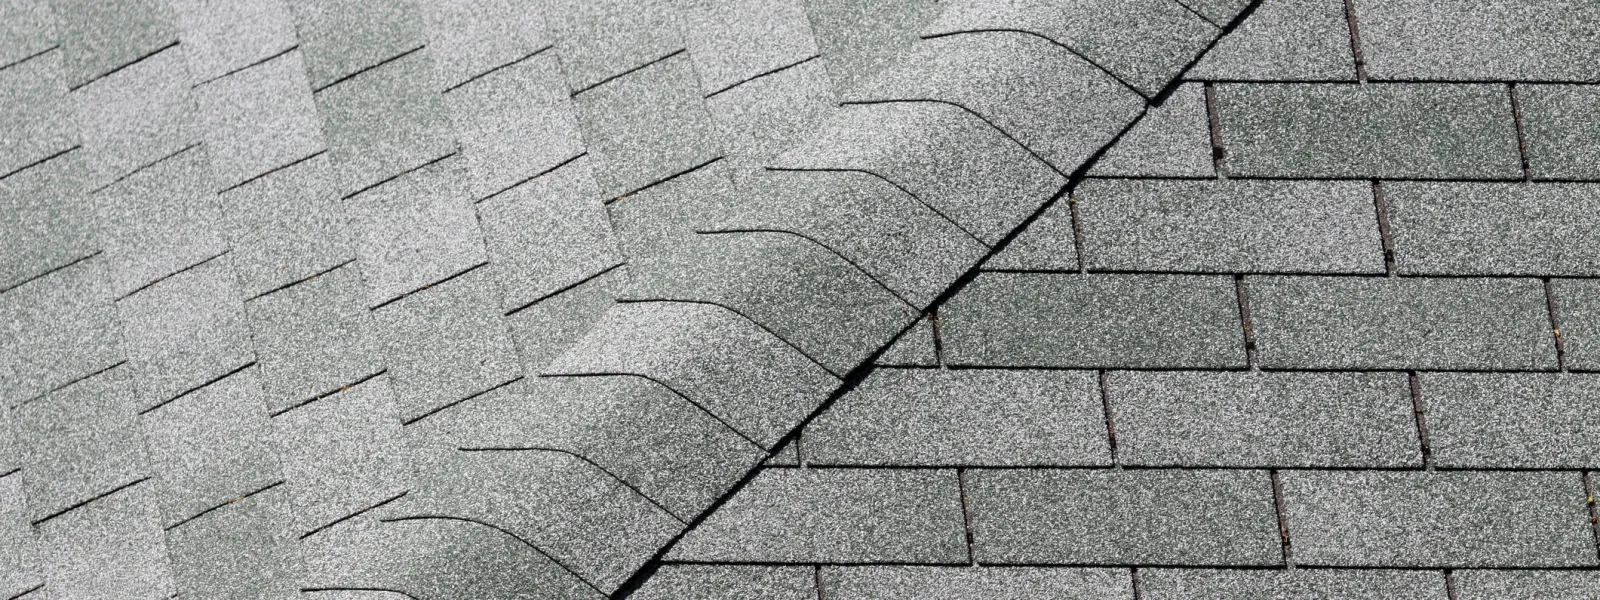 a close up of a brick building with 3 tab shingles